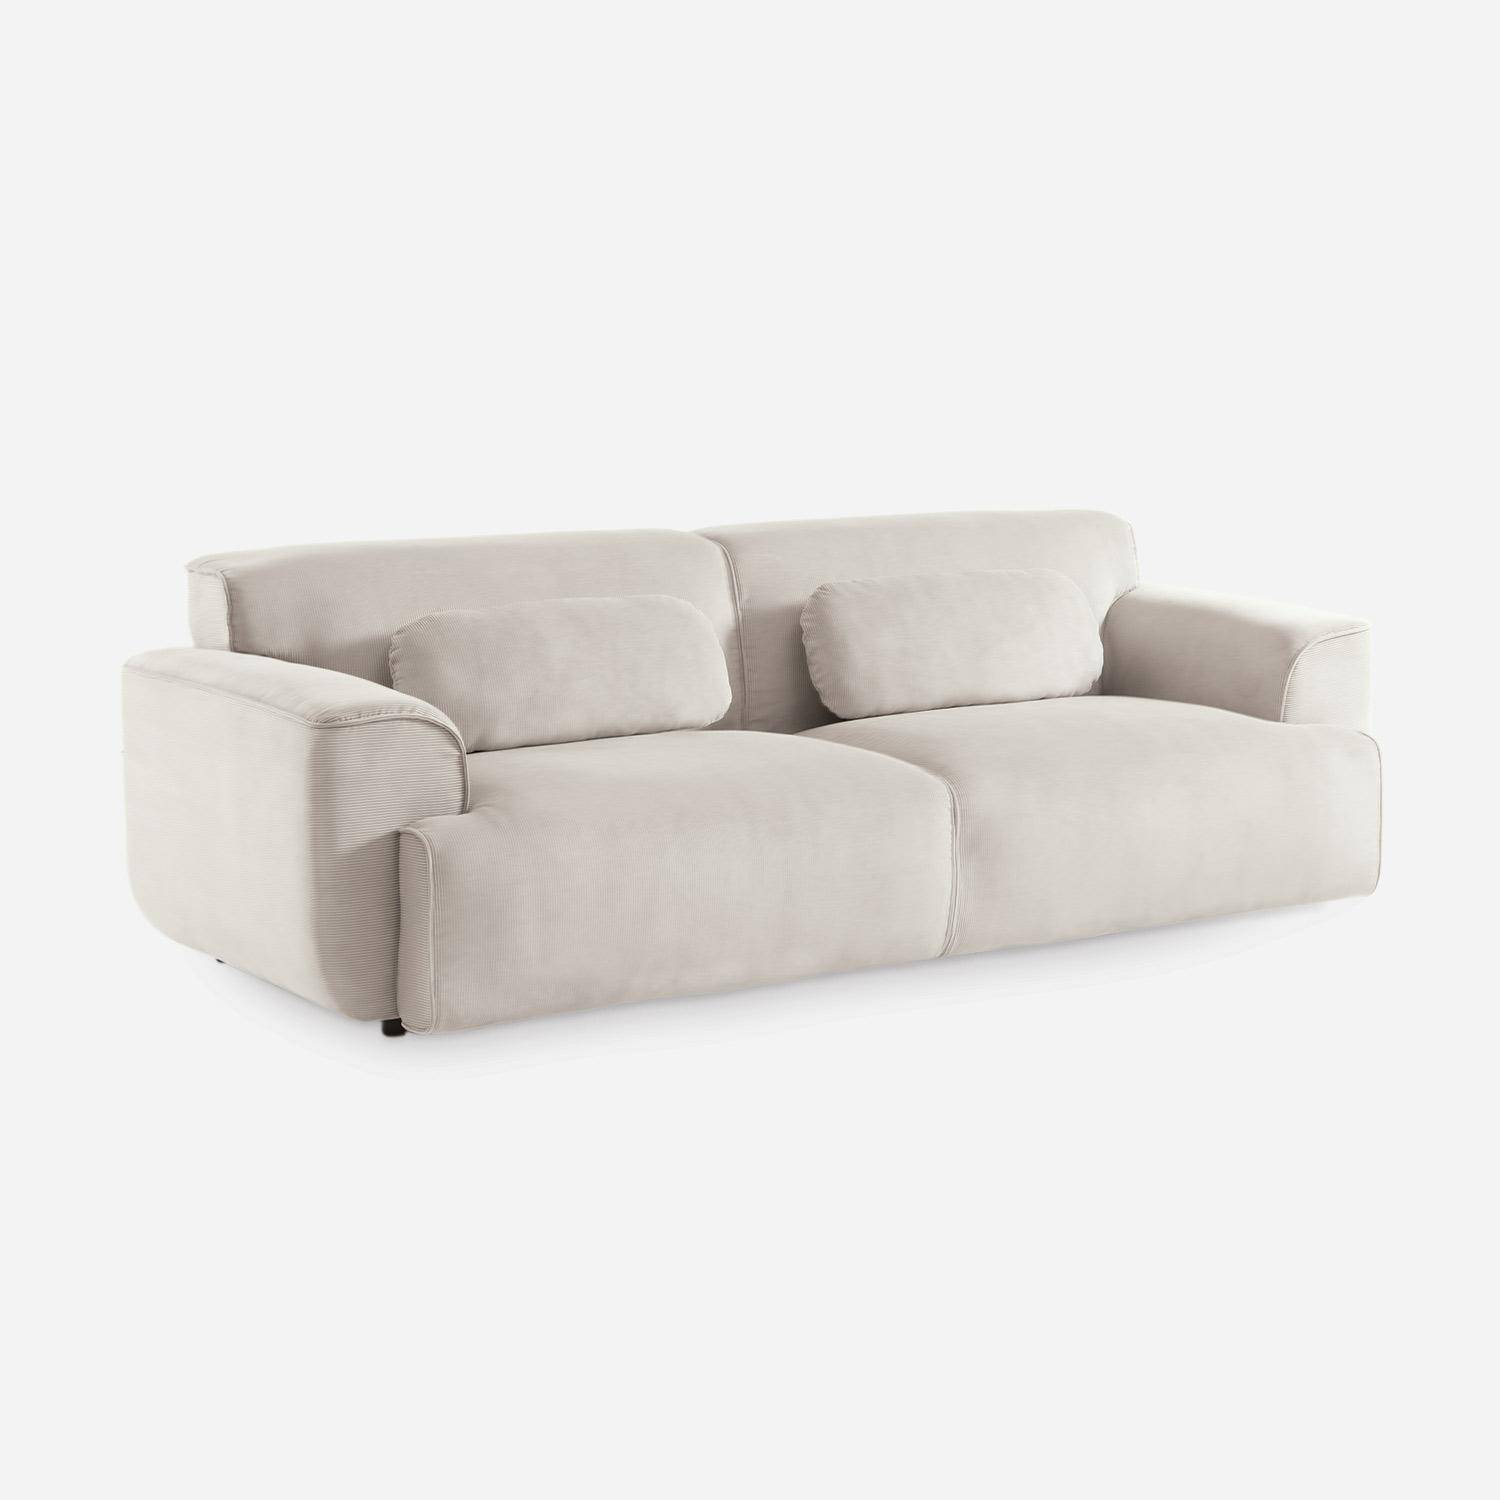  3-Seater corduroy velvet Sofa 230cm, deep seat, cushions provided and removable, beige Photo5